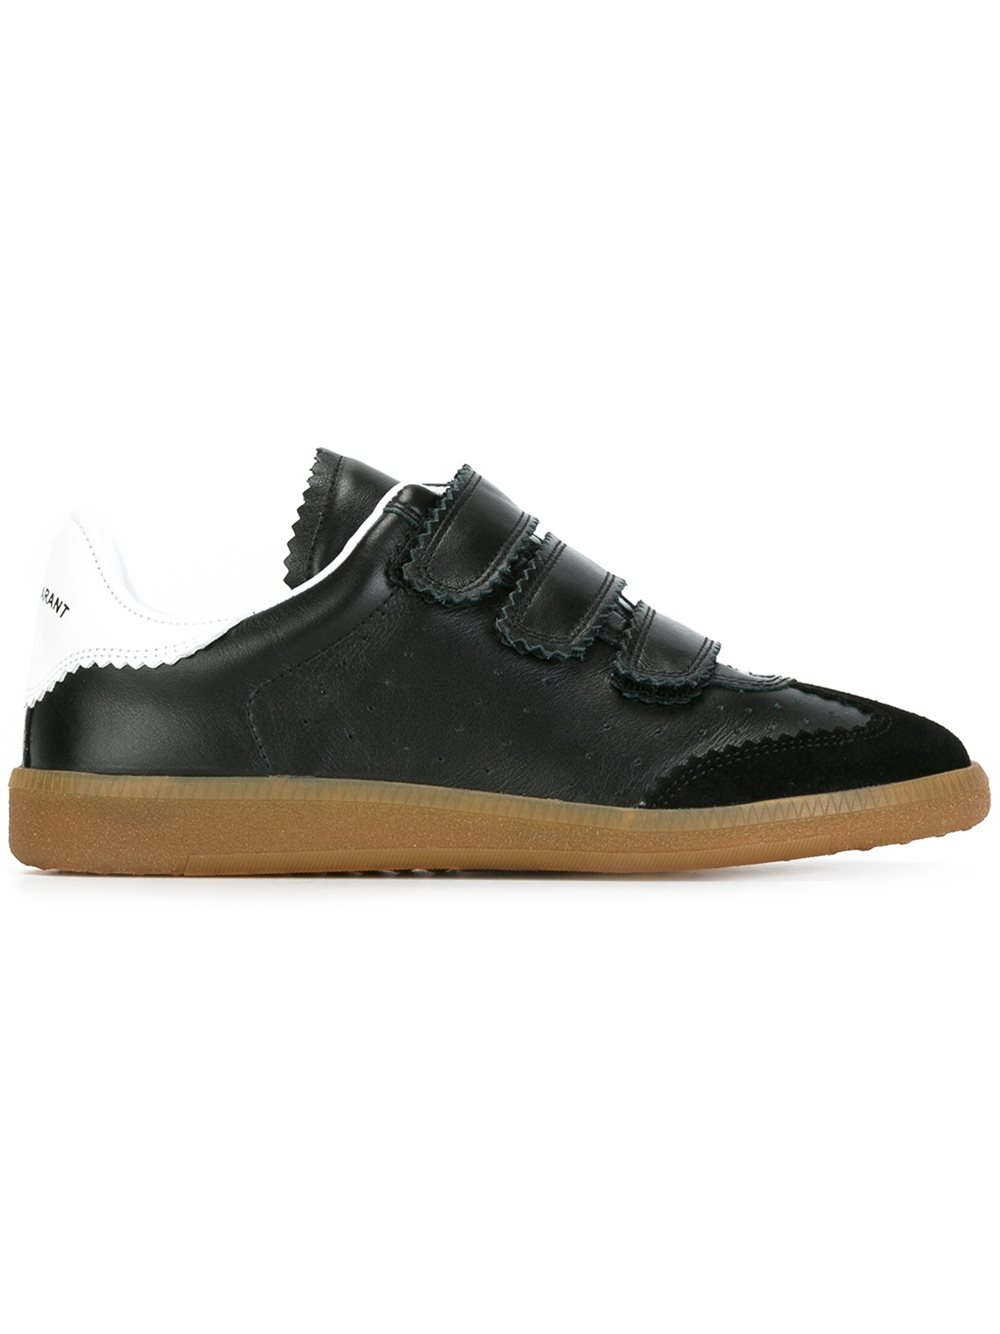 Isabel Marant Leather Étoile 'beth' Sneakers in Black - Lyst